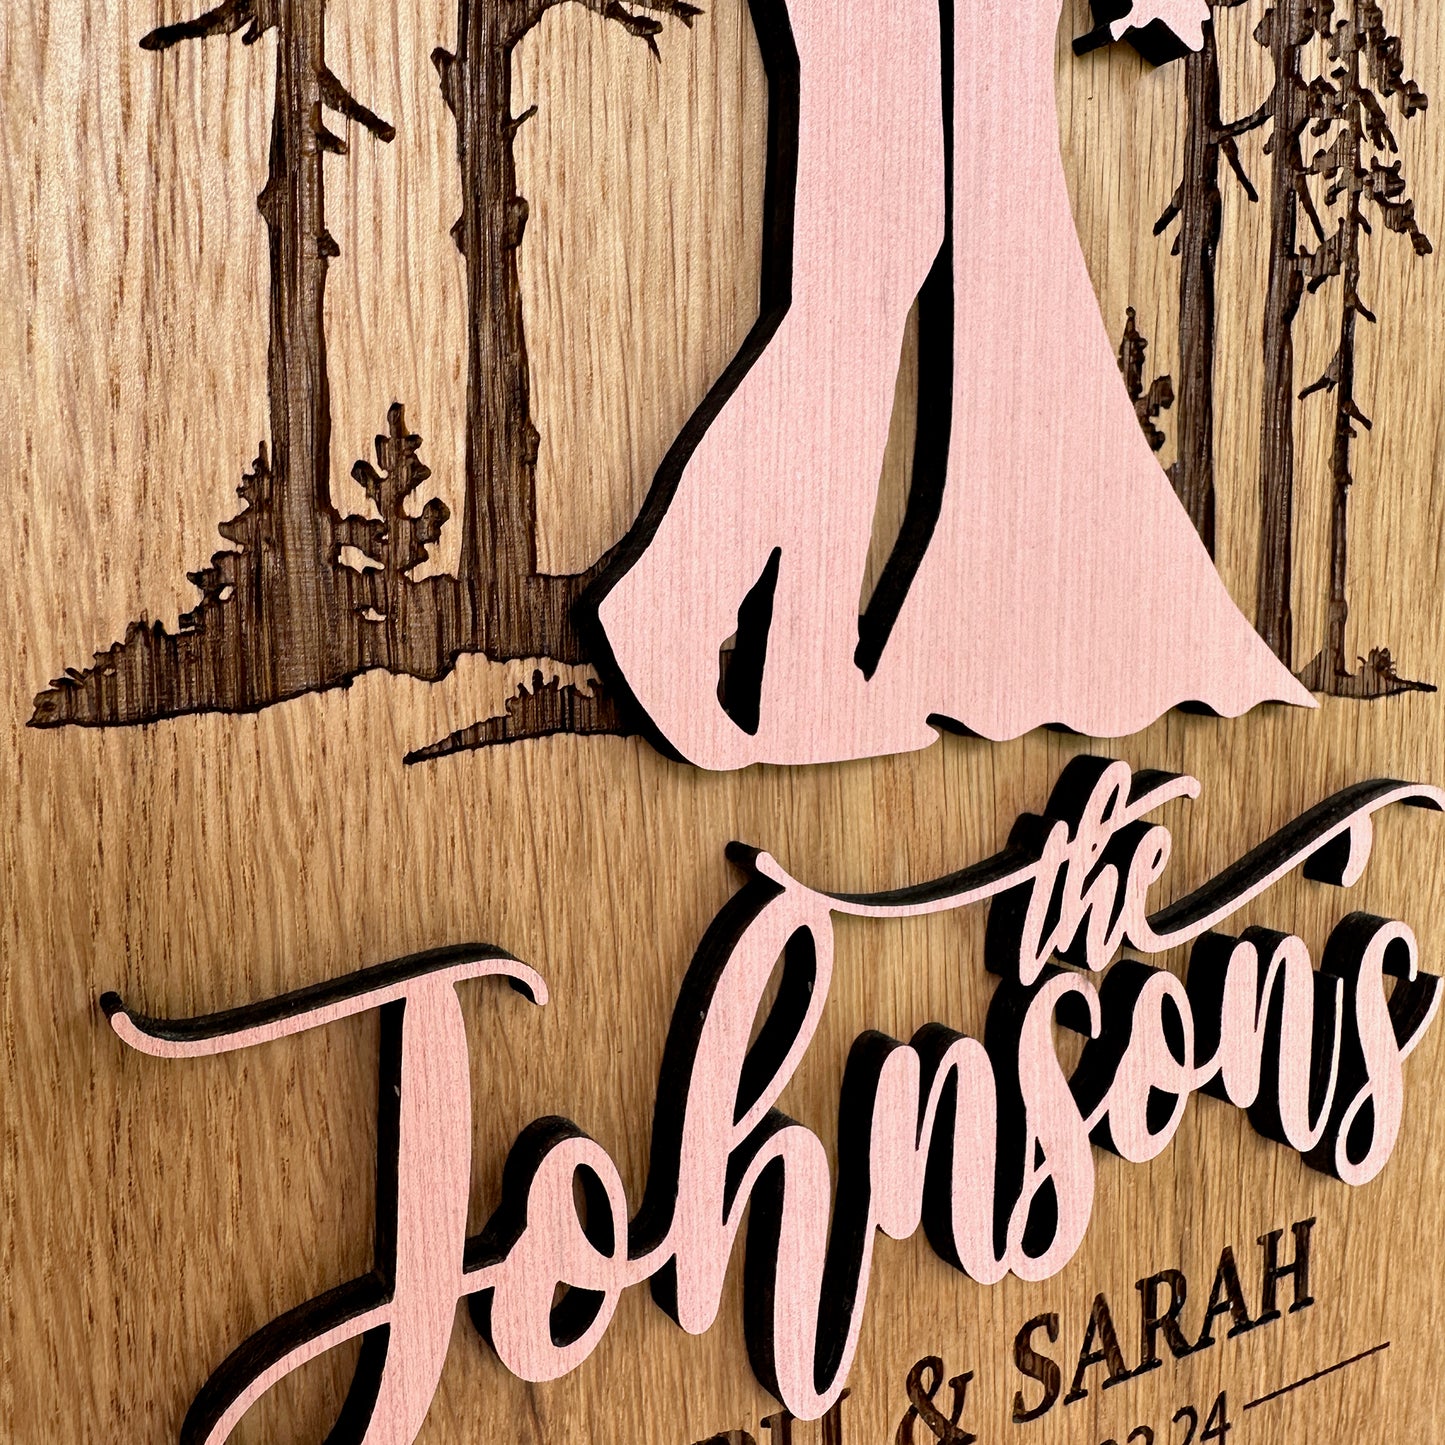 Personalized Tall Pines Engraved and Raised Cut Wedding Gift